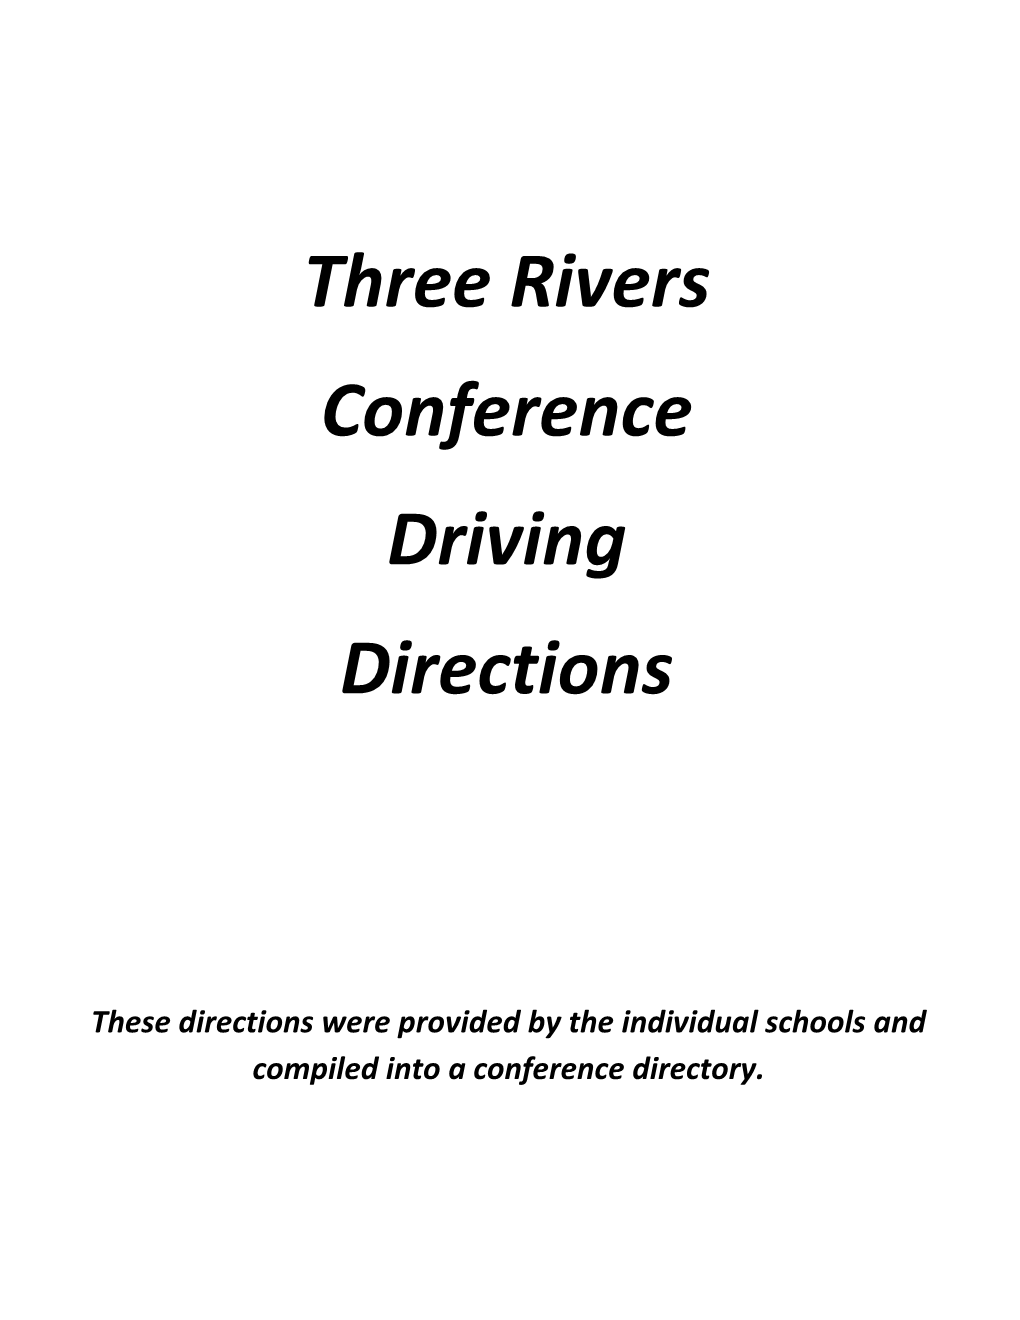 These Directions Were Provided by the Individual Schools and Compiled Into a Conference